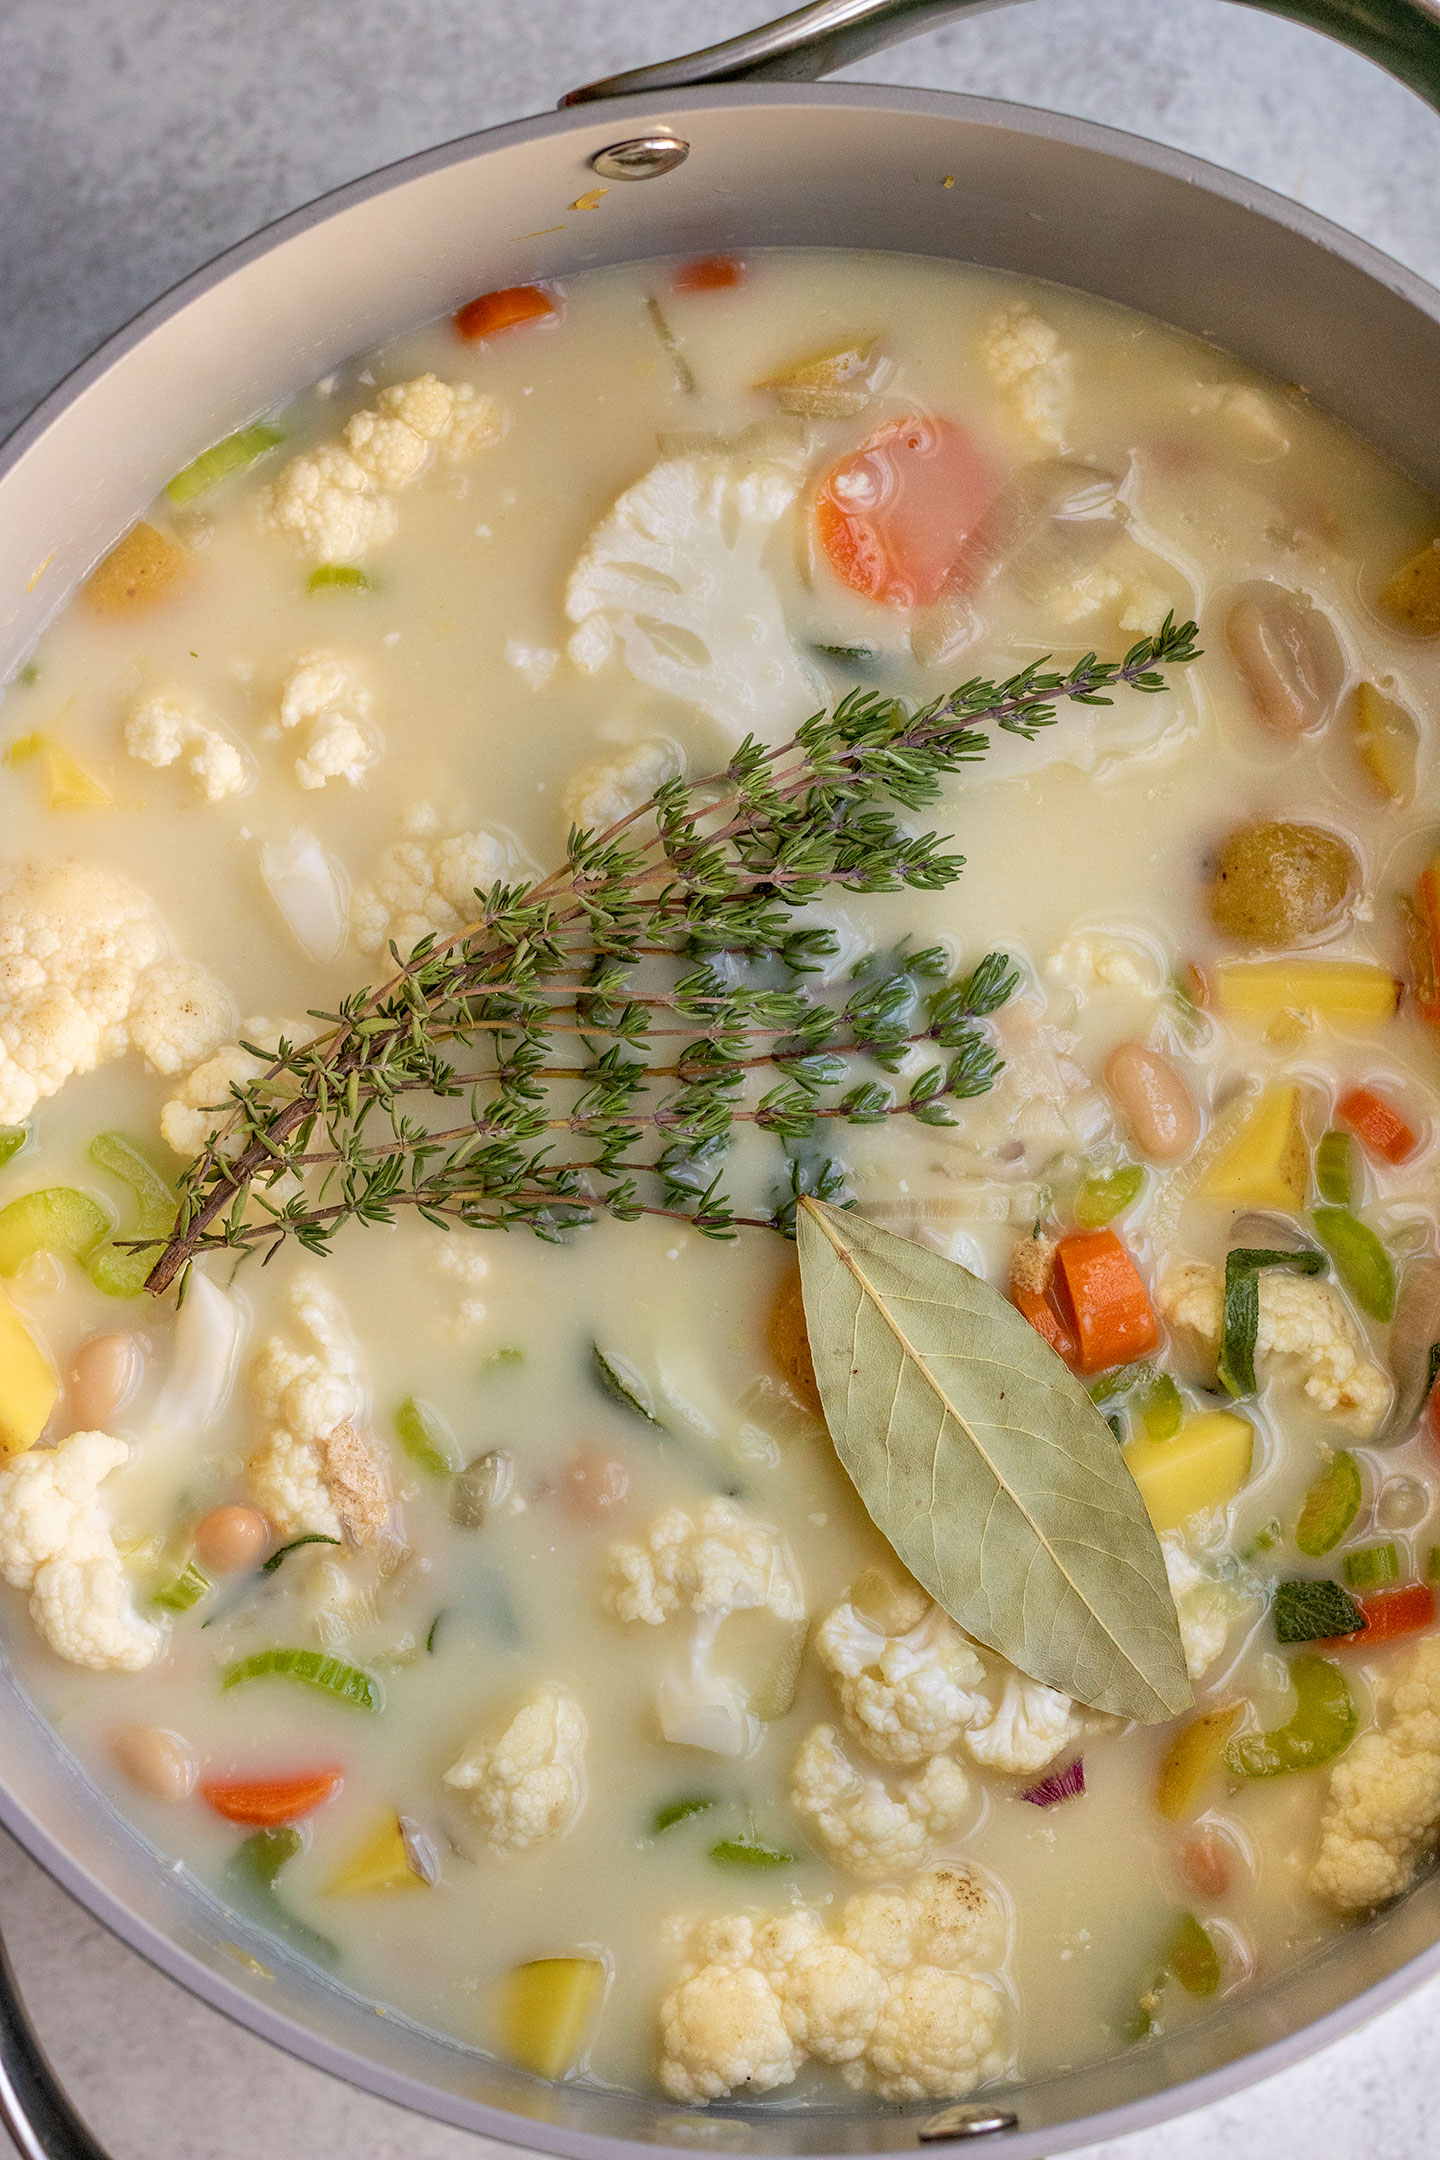 All of the pot pie soup ingredients added to a large soup pot and topped with thyme and bay leaves before simmering.